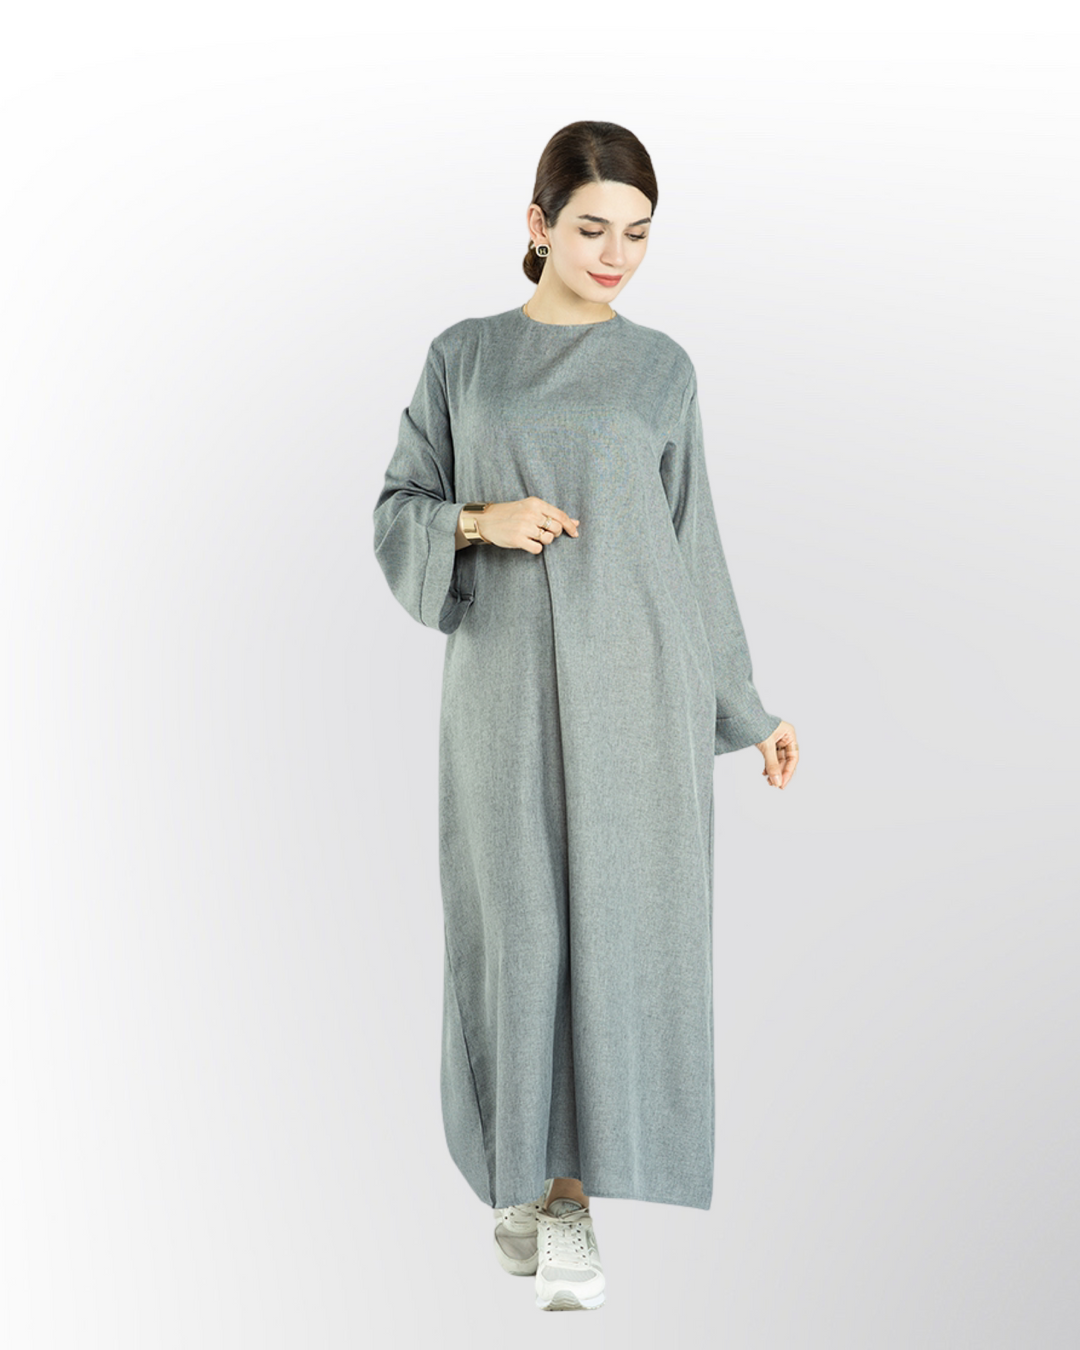 Get trendy with Elora Linen Set - Gray - Dresses available at Voilee NY. Grab yours for $99.90 today!